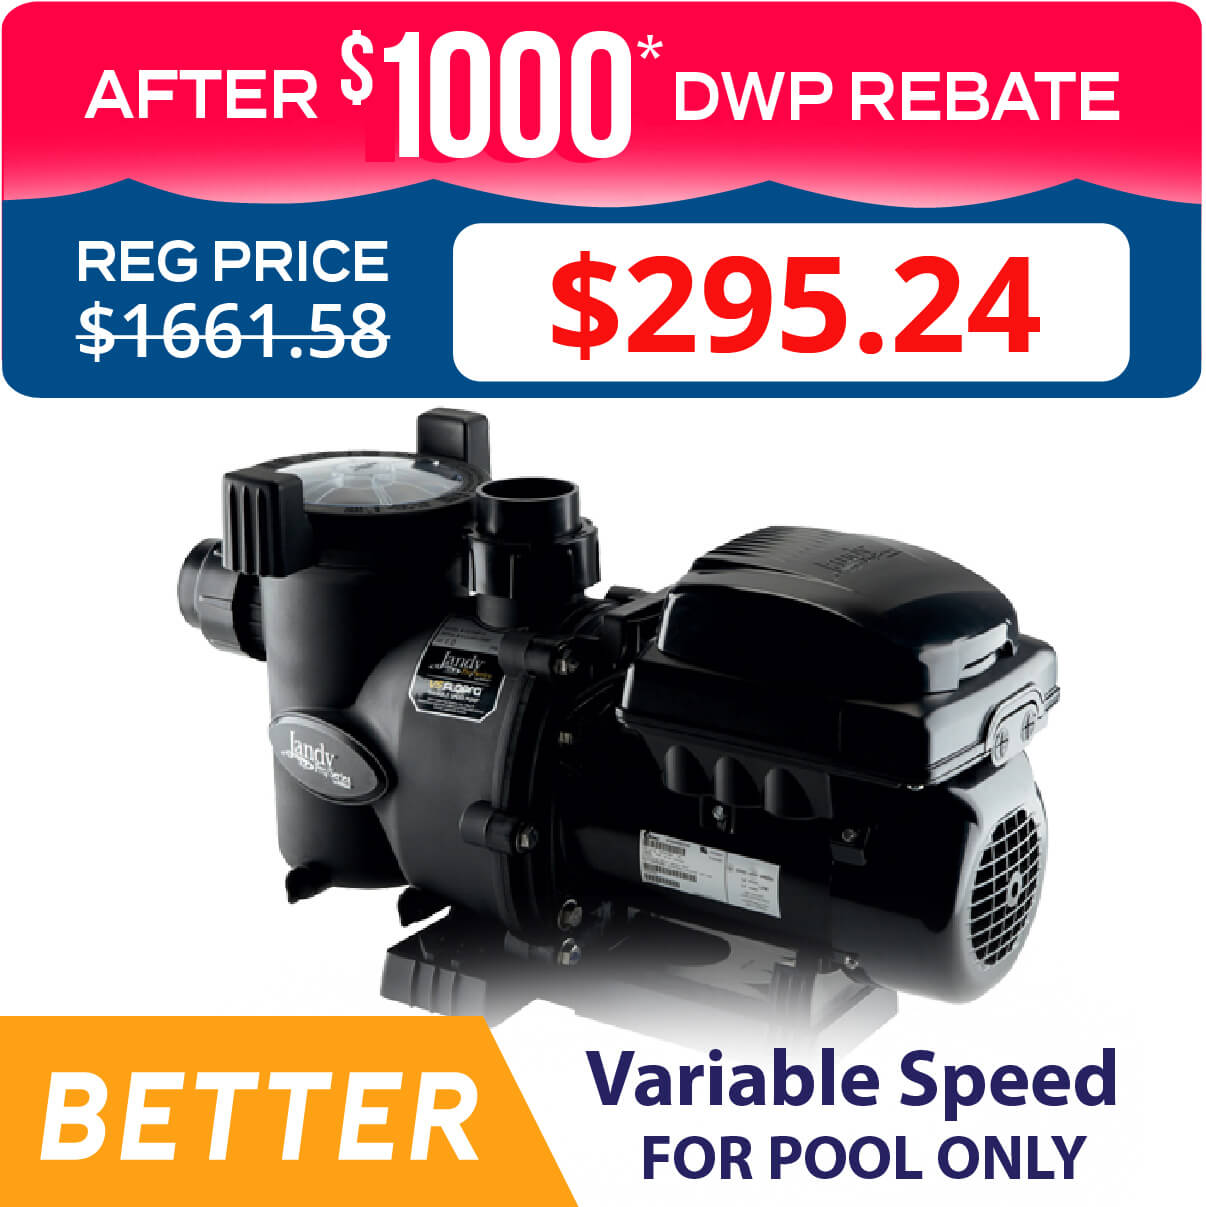 jandy-vsfhp165aut-1-65hp-vs-flopro-variable-speed-pump-with-bundle